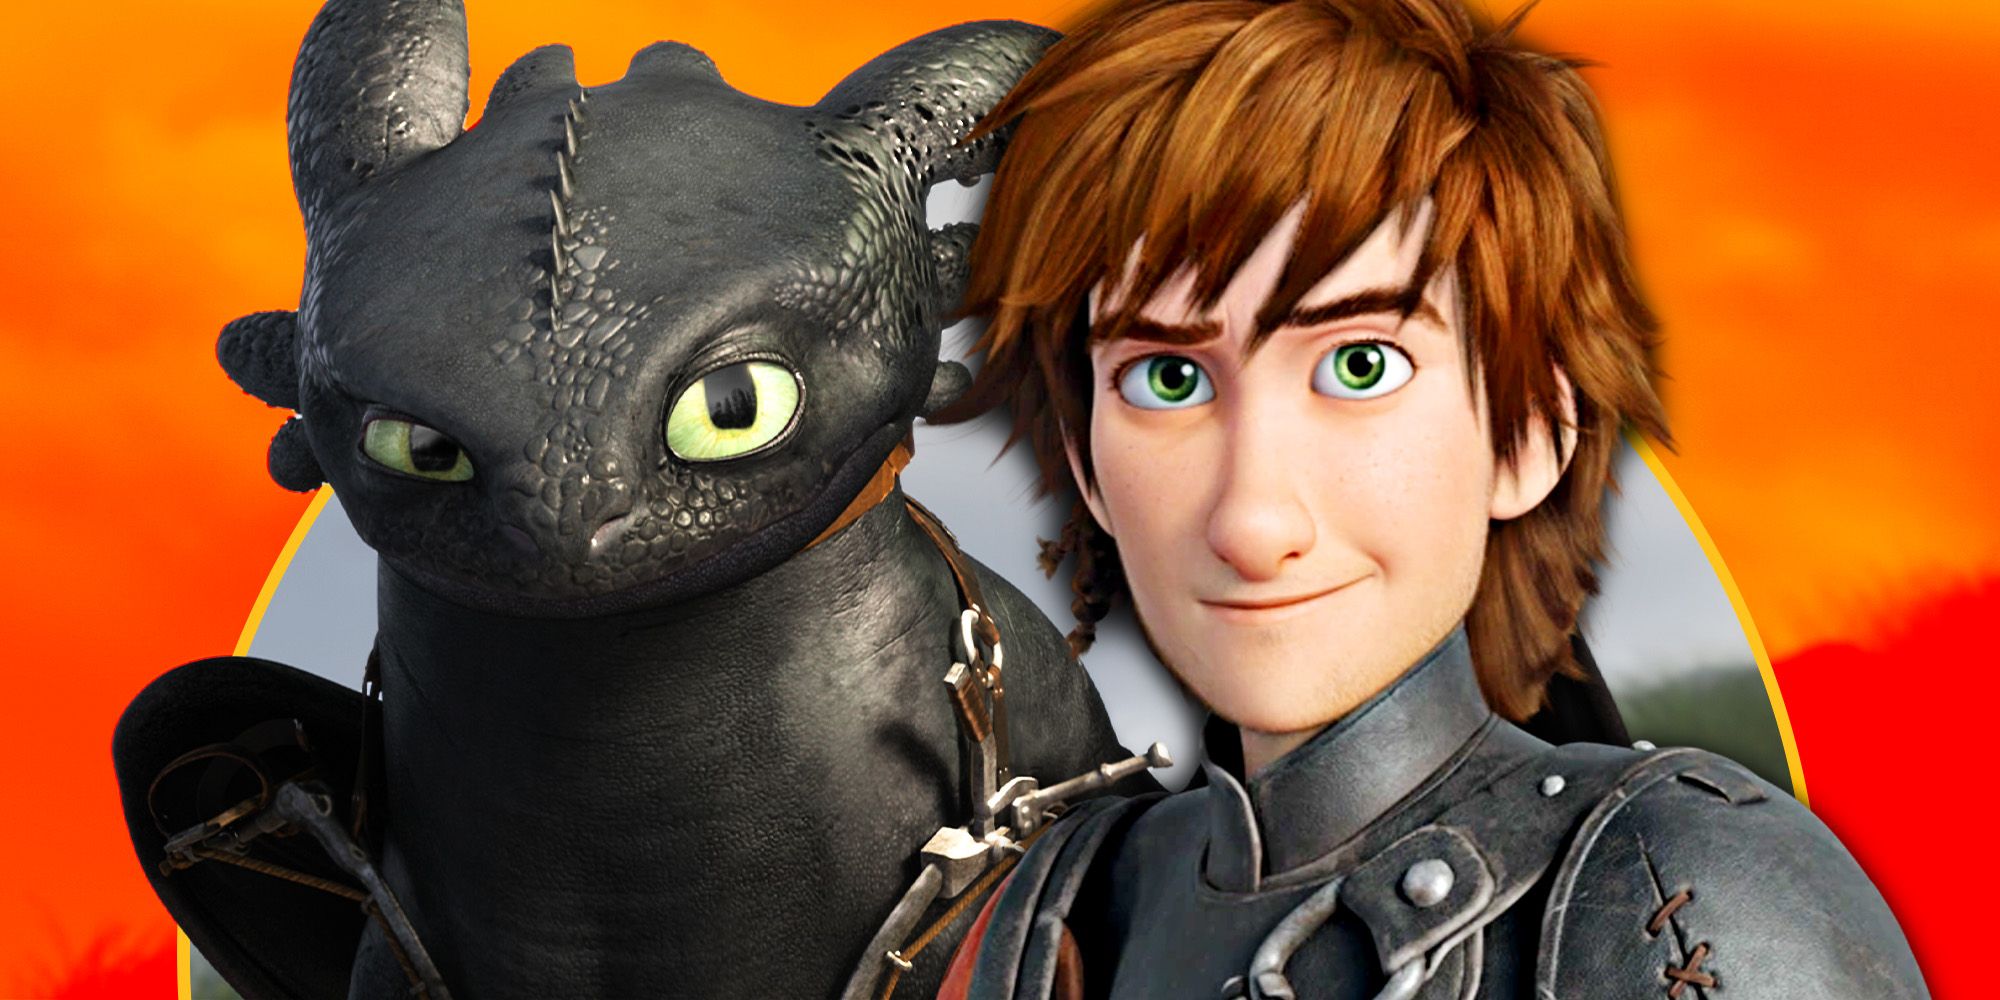 Animated Hiccup and Toothless from How To Train Your Dragon 2